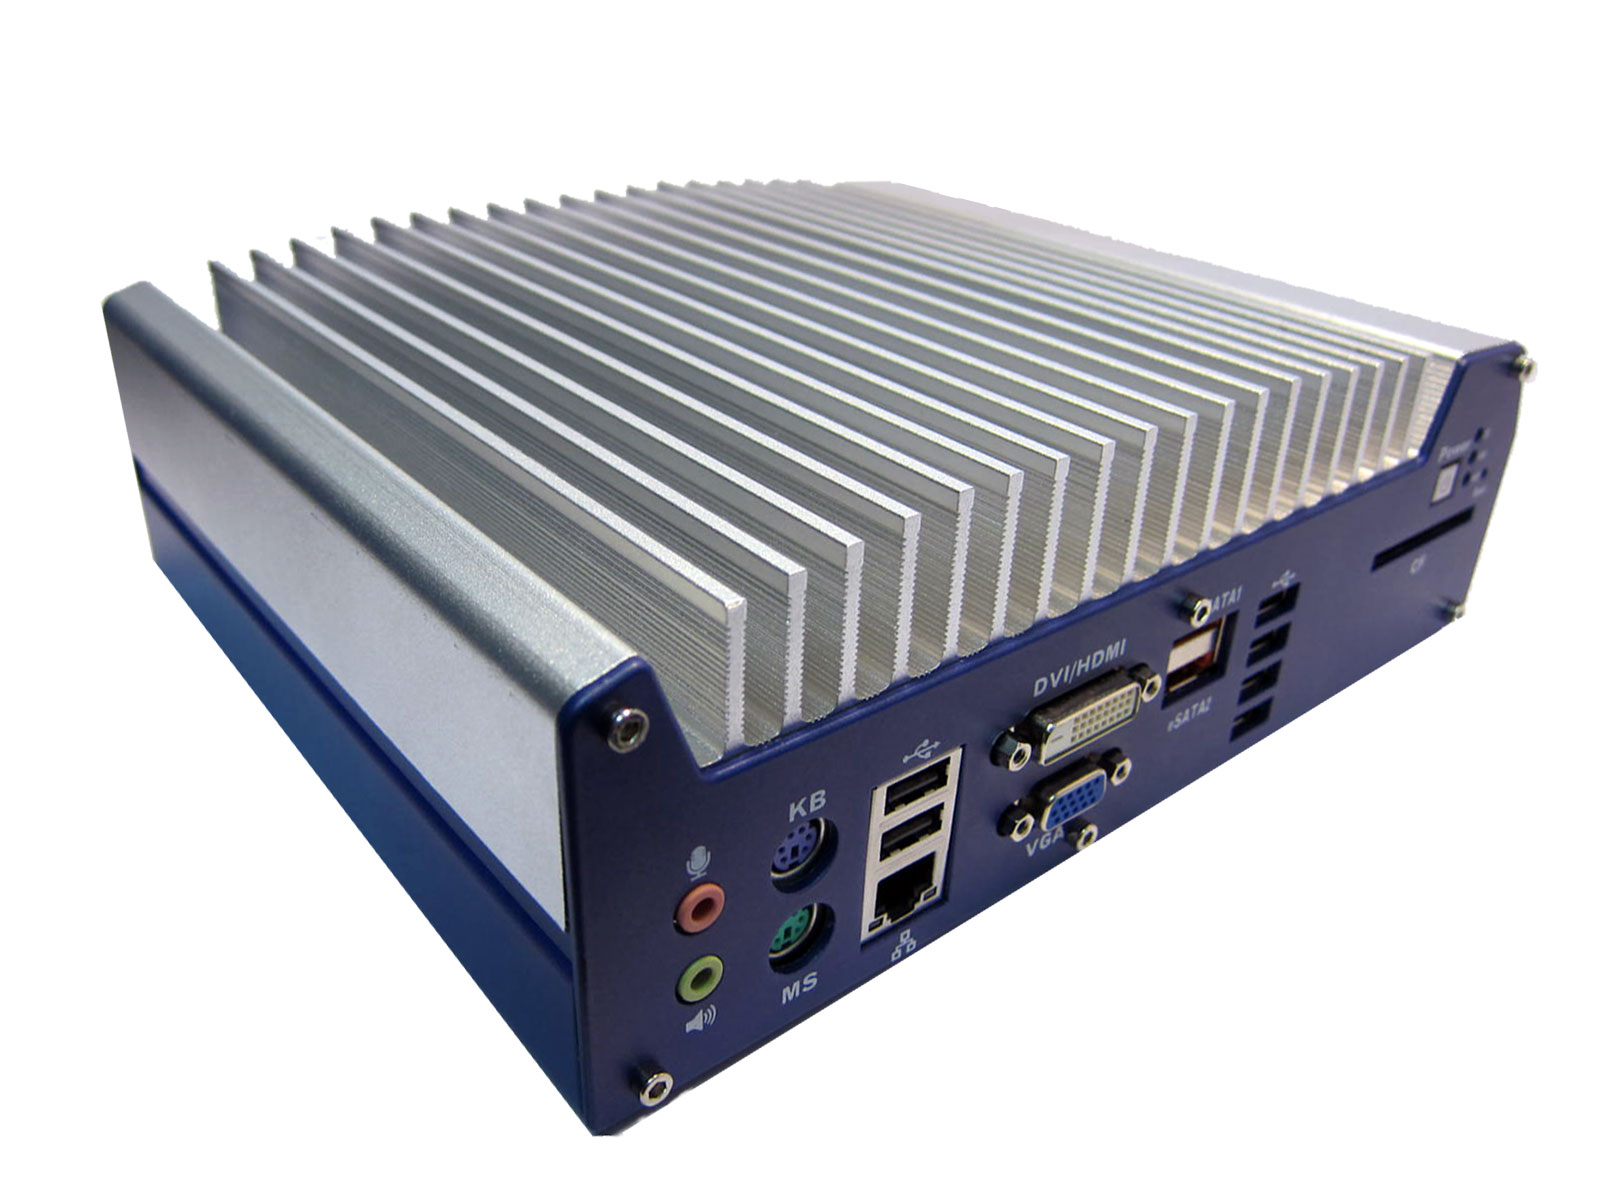 Vecow, EC-3000, Intel® Core™ i7/i5, Embedded System